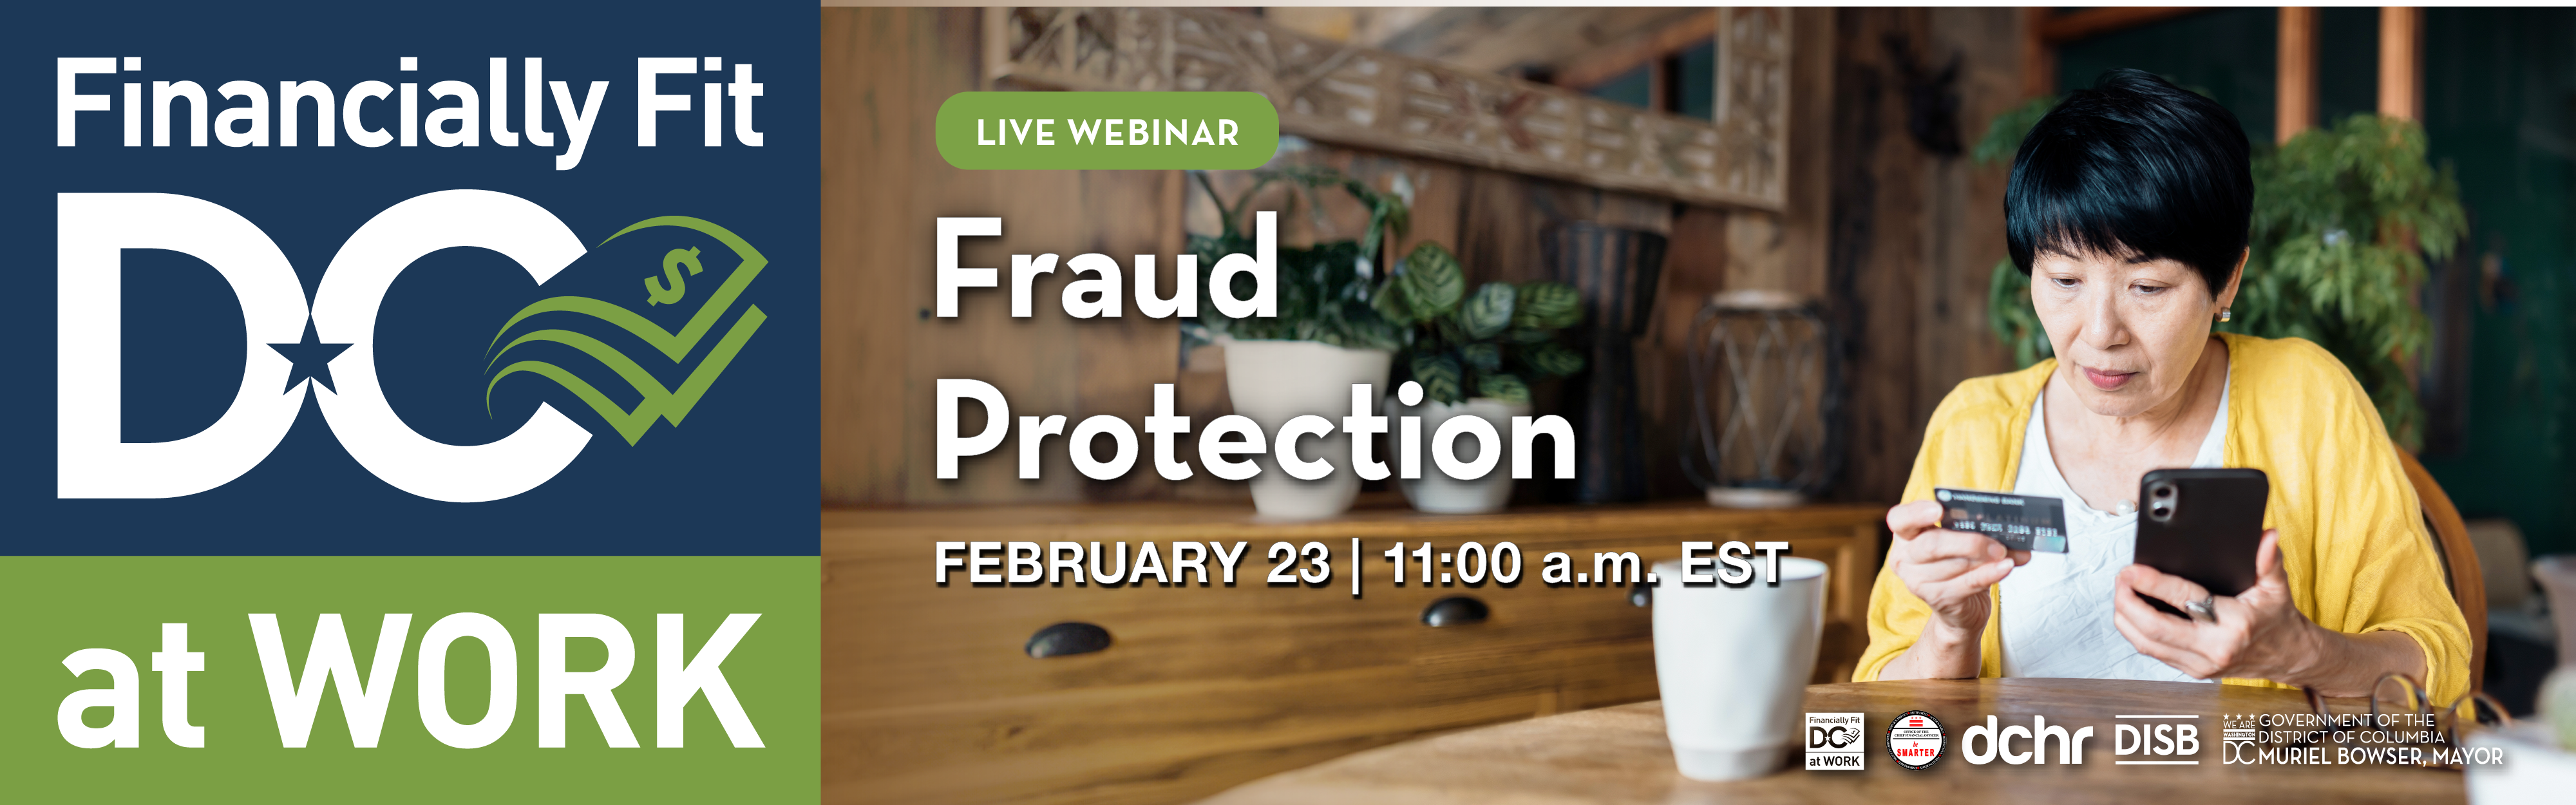 Financially Fit DC at Work Presents: Fraud Protection